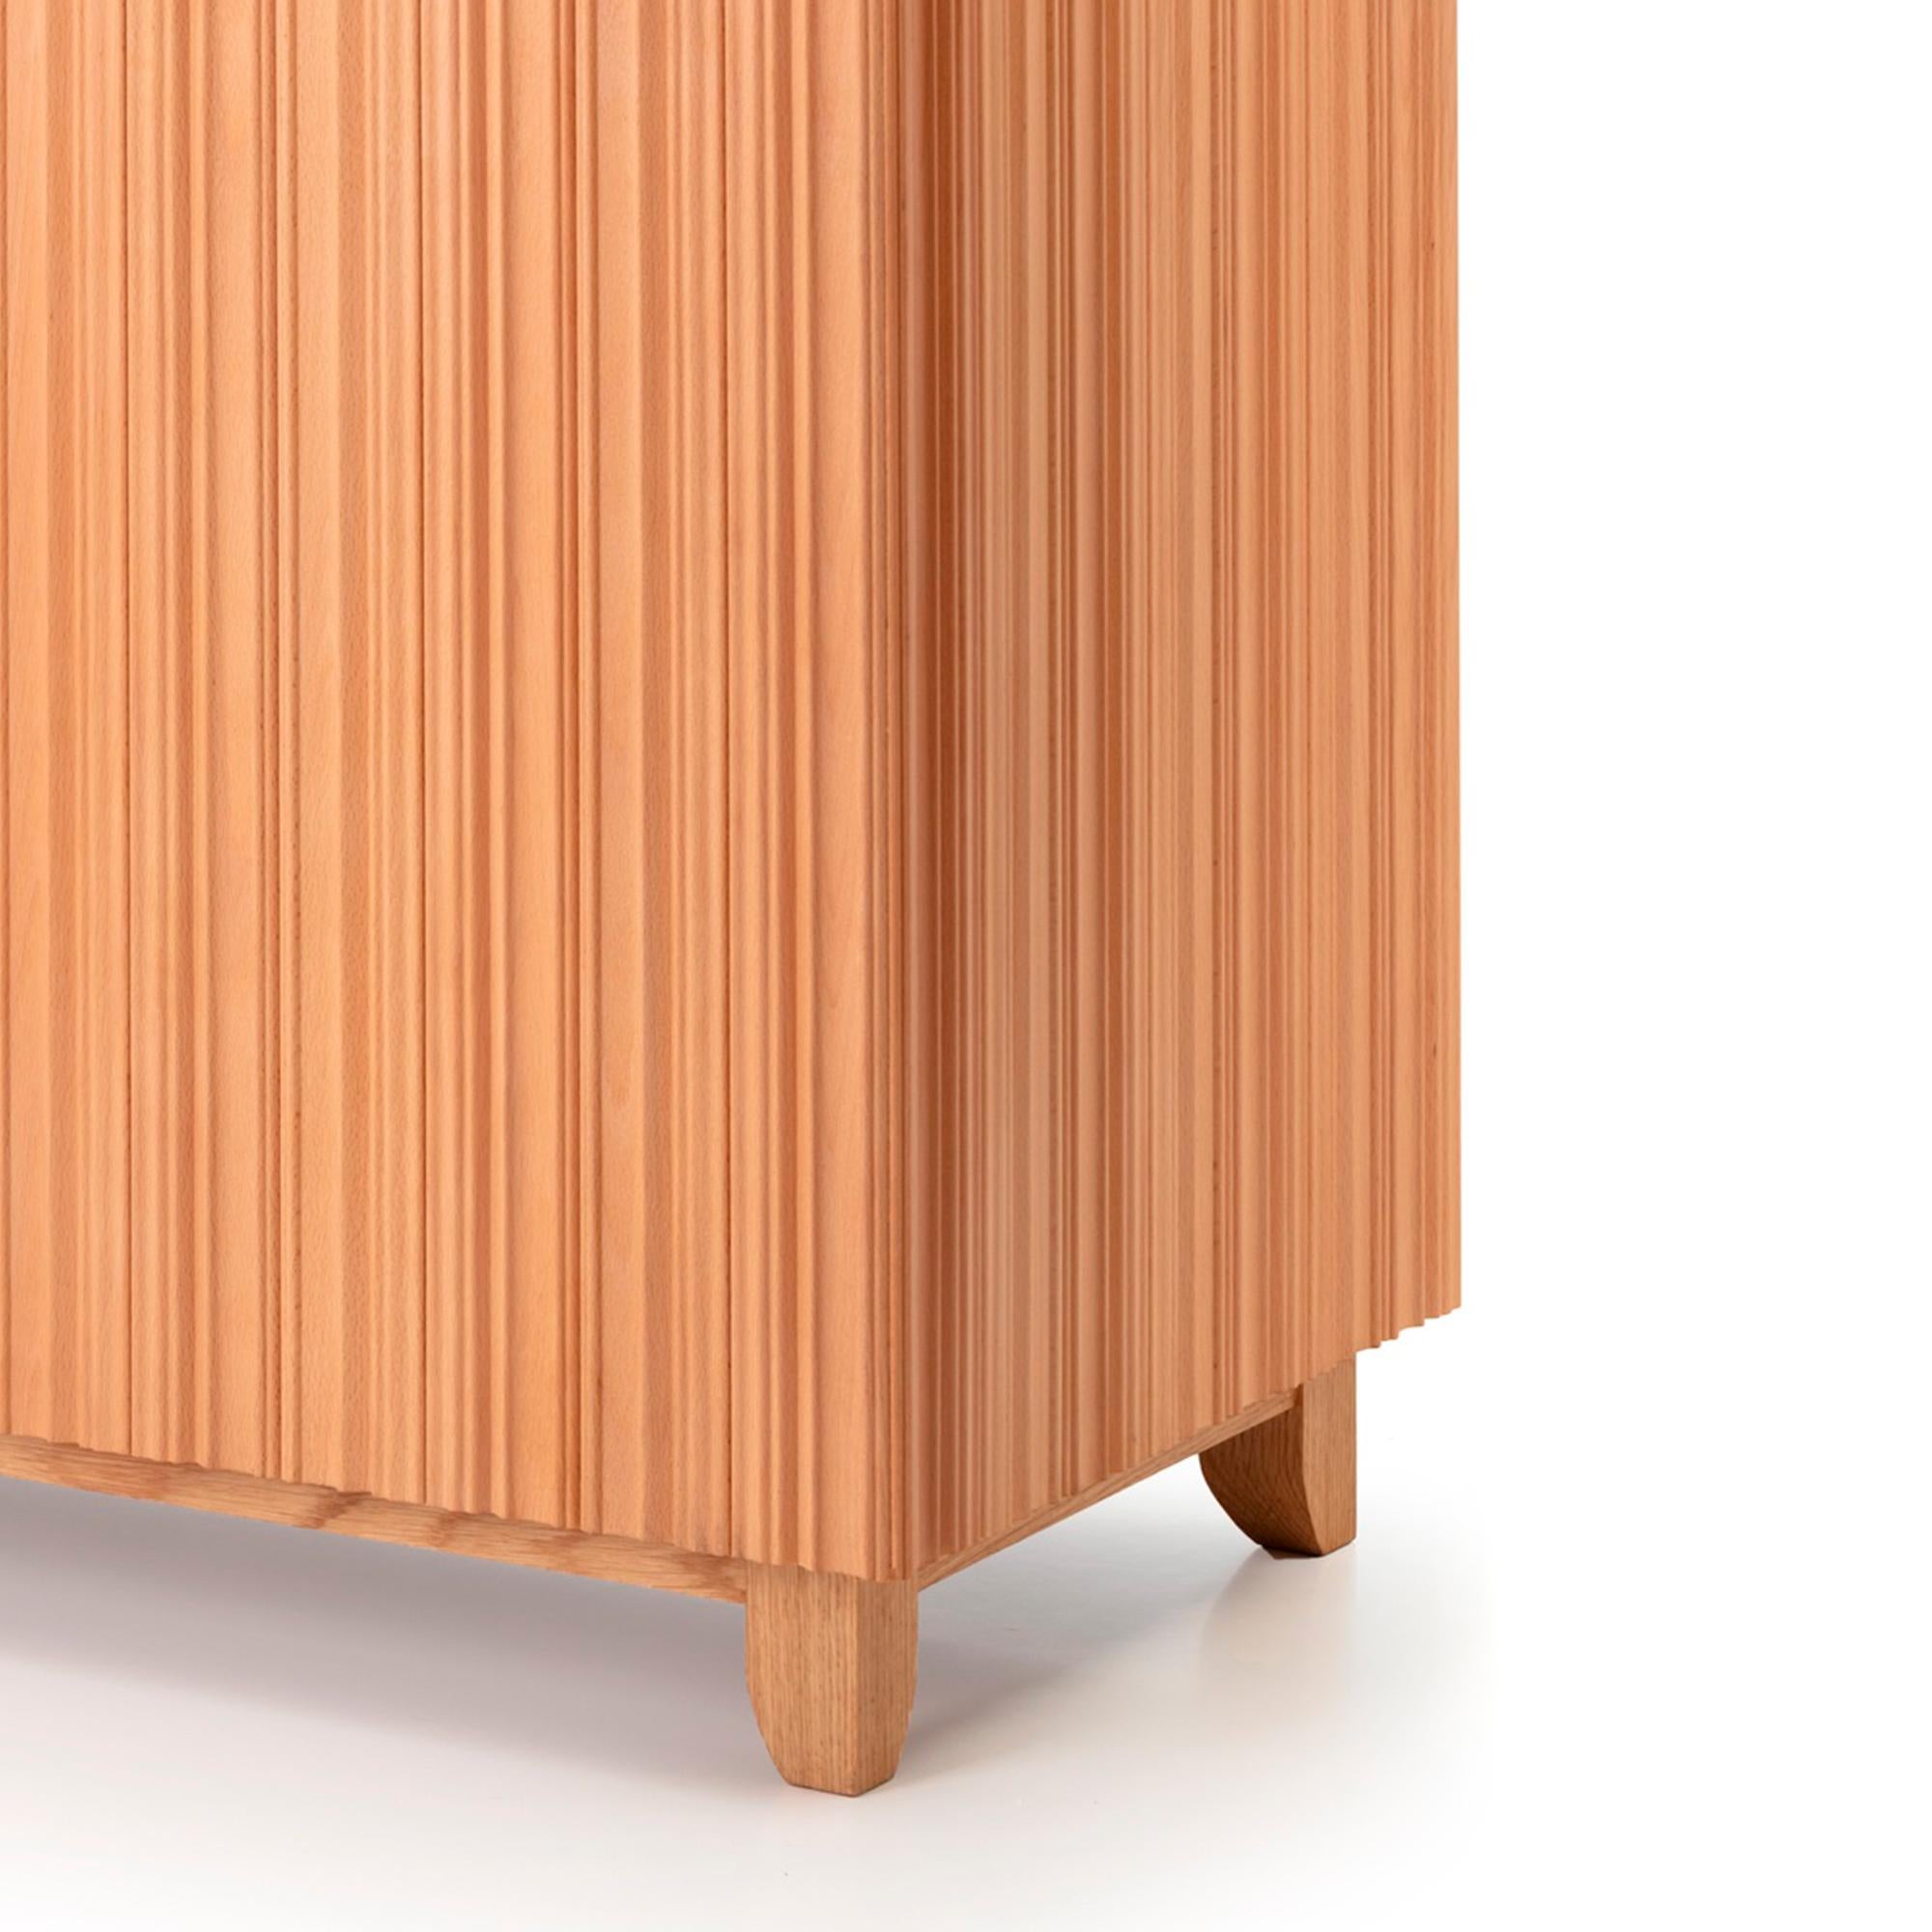 Emily is an original design by Ding Dong Architecture & Interiors Studio. Made in beech wood with solid oak top, matte finishing and polished stainless steel/brass locker, Emily is an elegant and timeless sideboard.

The Emily sideboard features